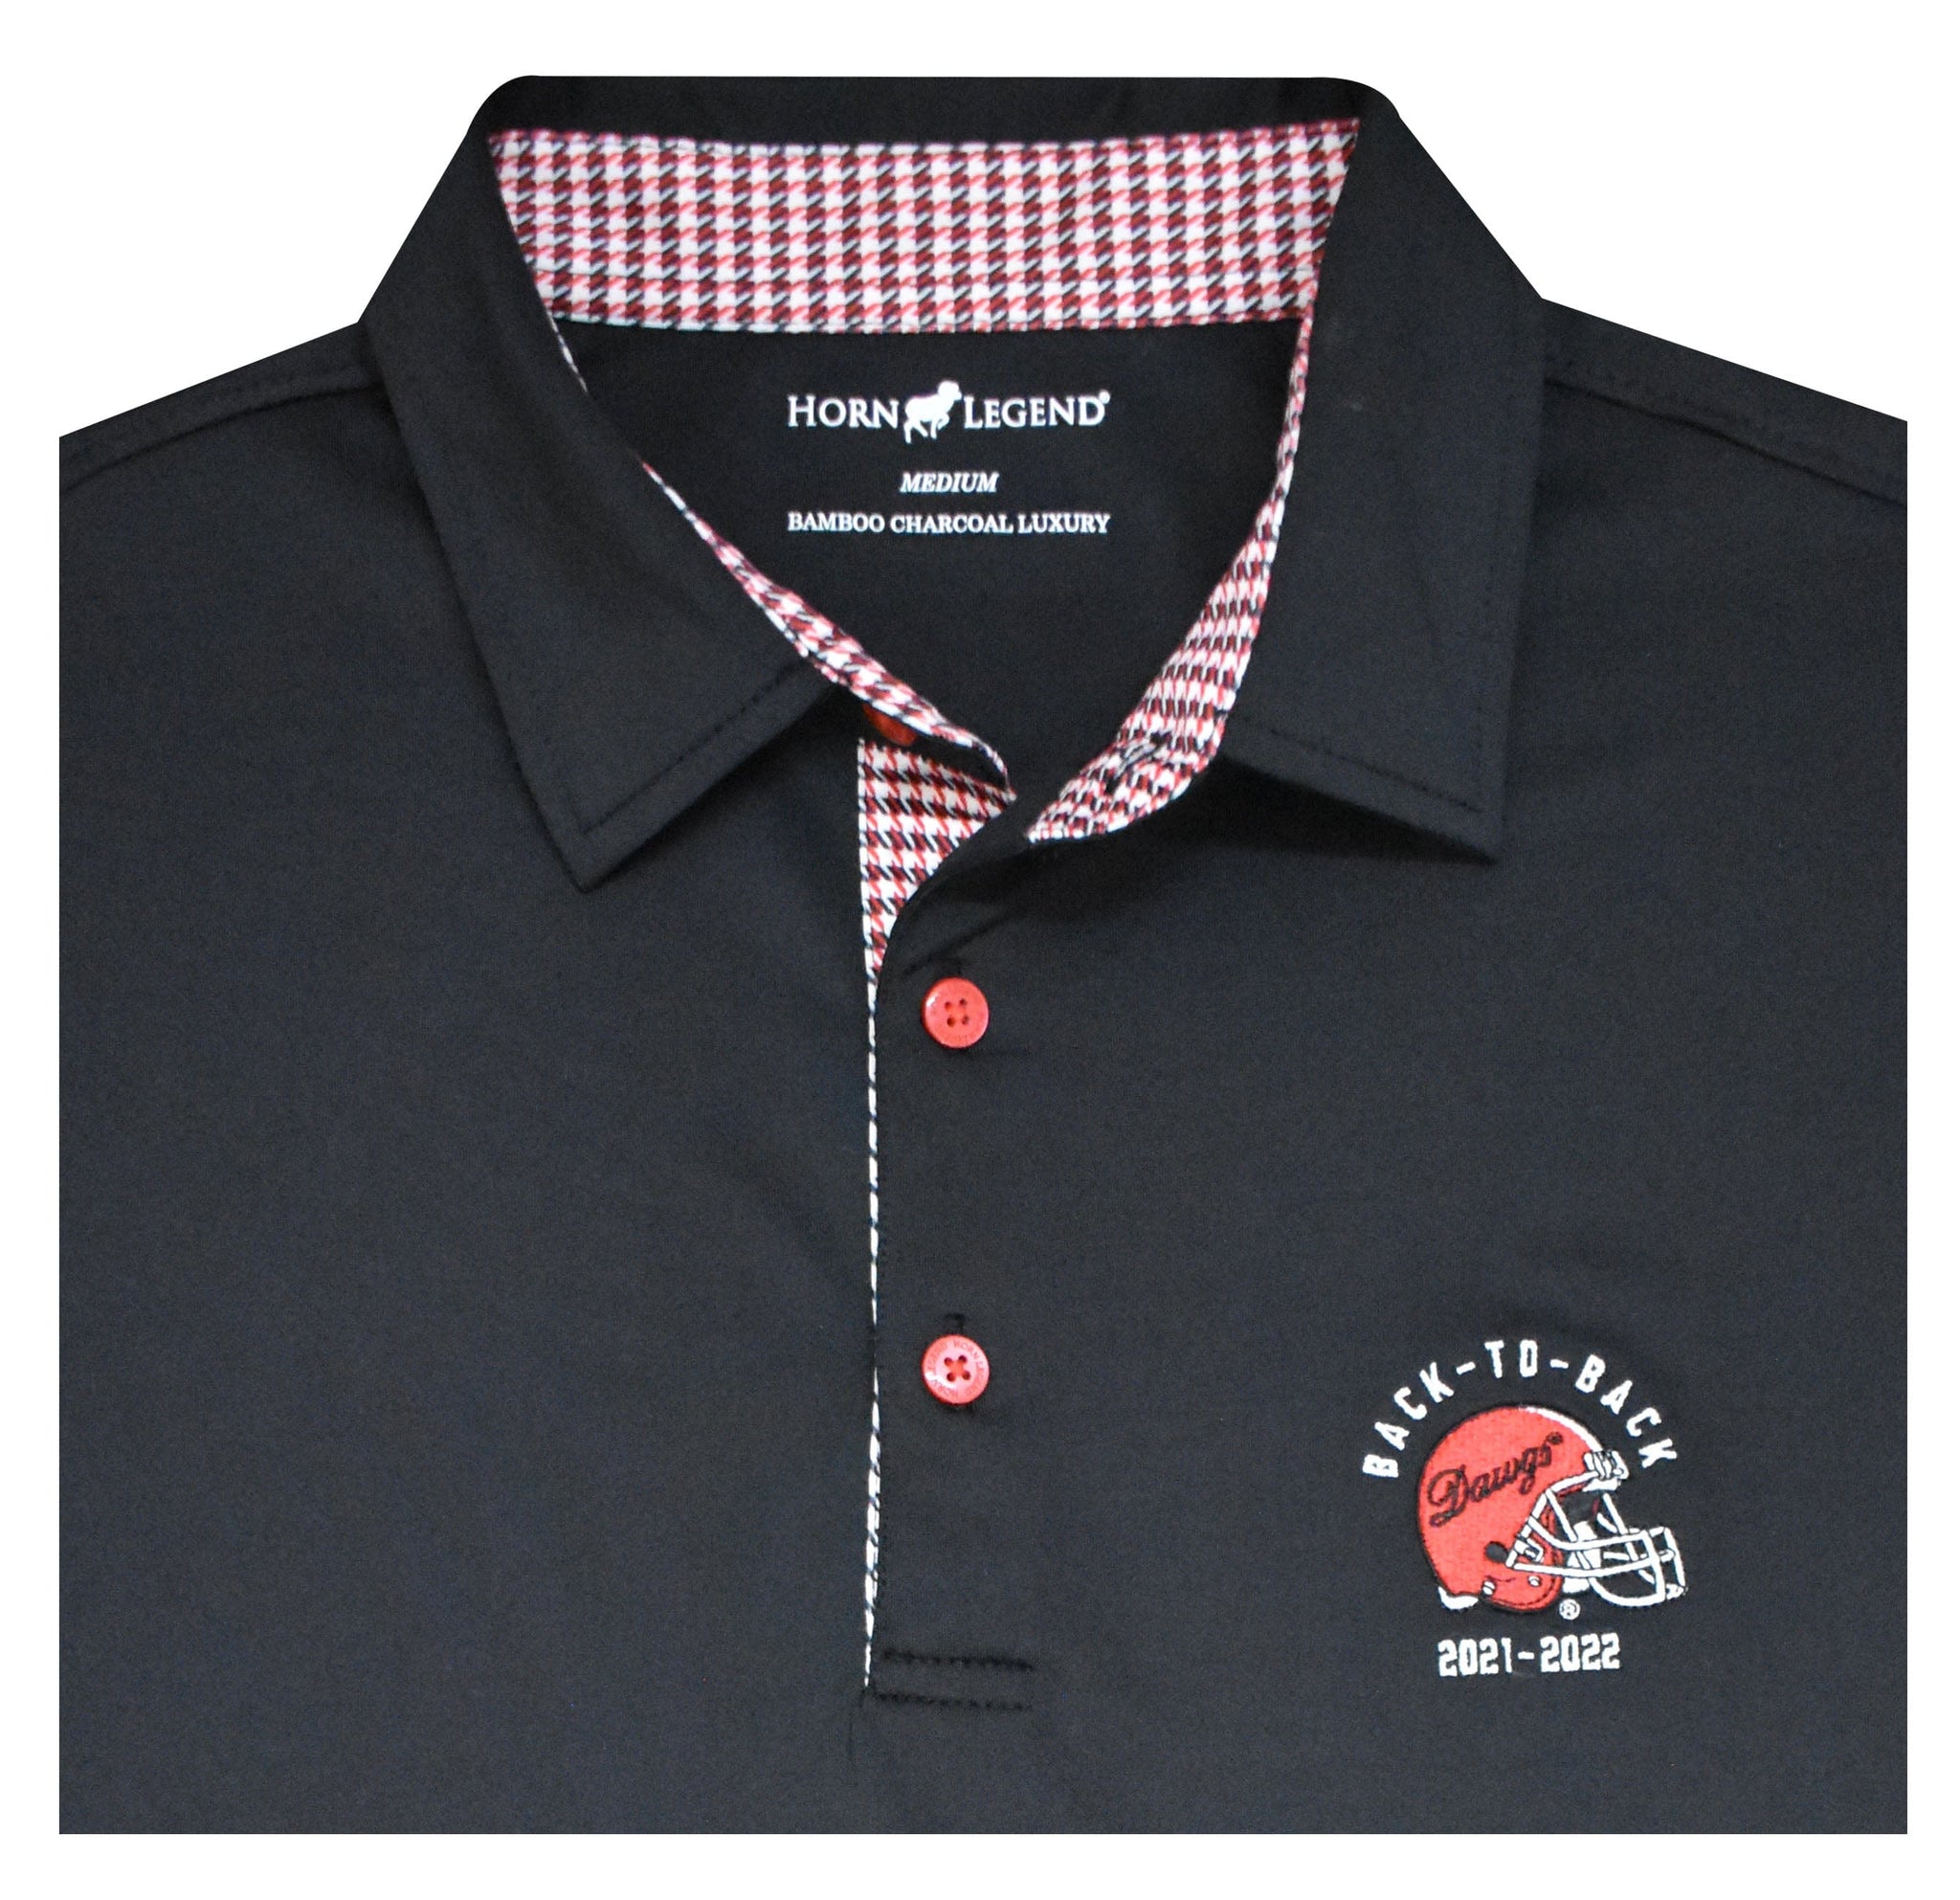 HORN LEGEND GAMEDAY - UNIVERSITY OF GEORGIA - BACK-TO-BACK - POLO BLACK / S DAWGS BACK-TO-BACK HOUNDSTOOTH TRIM POLO